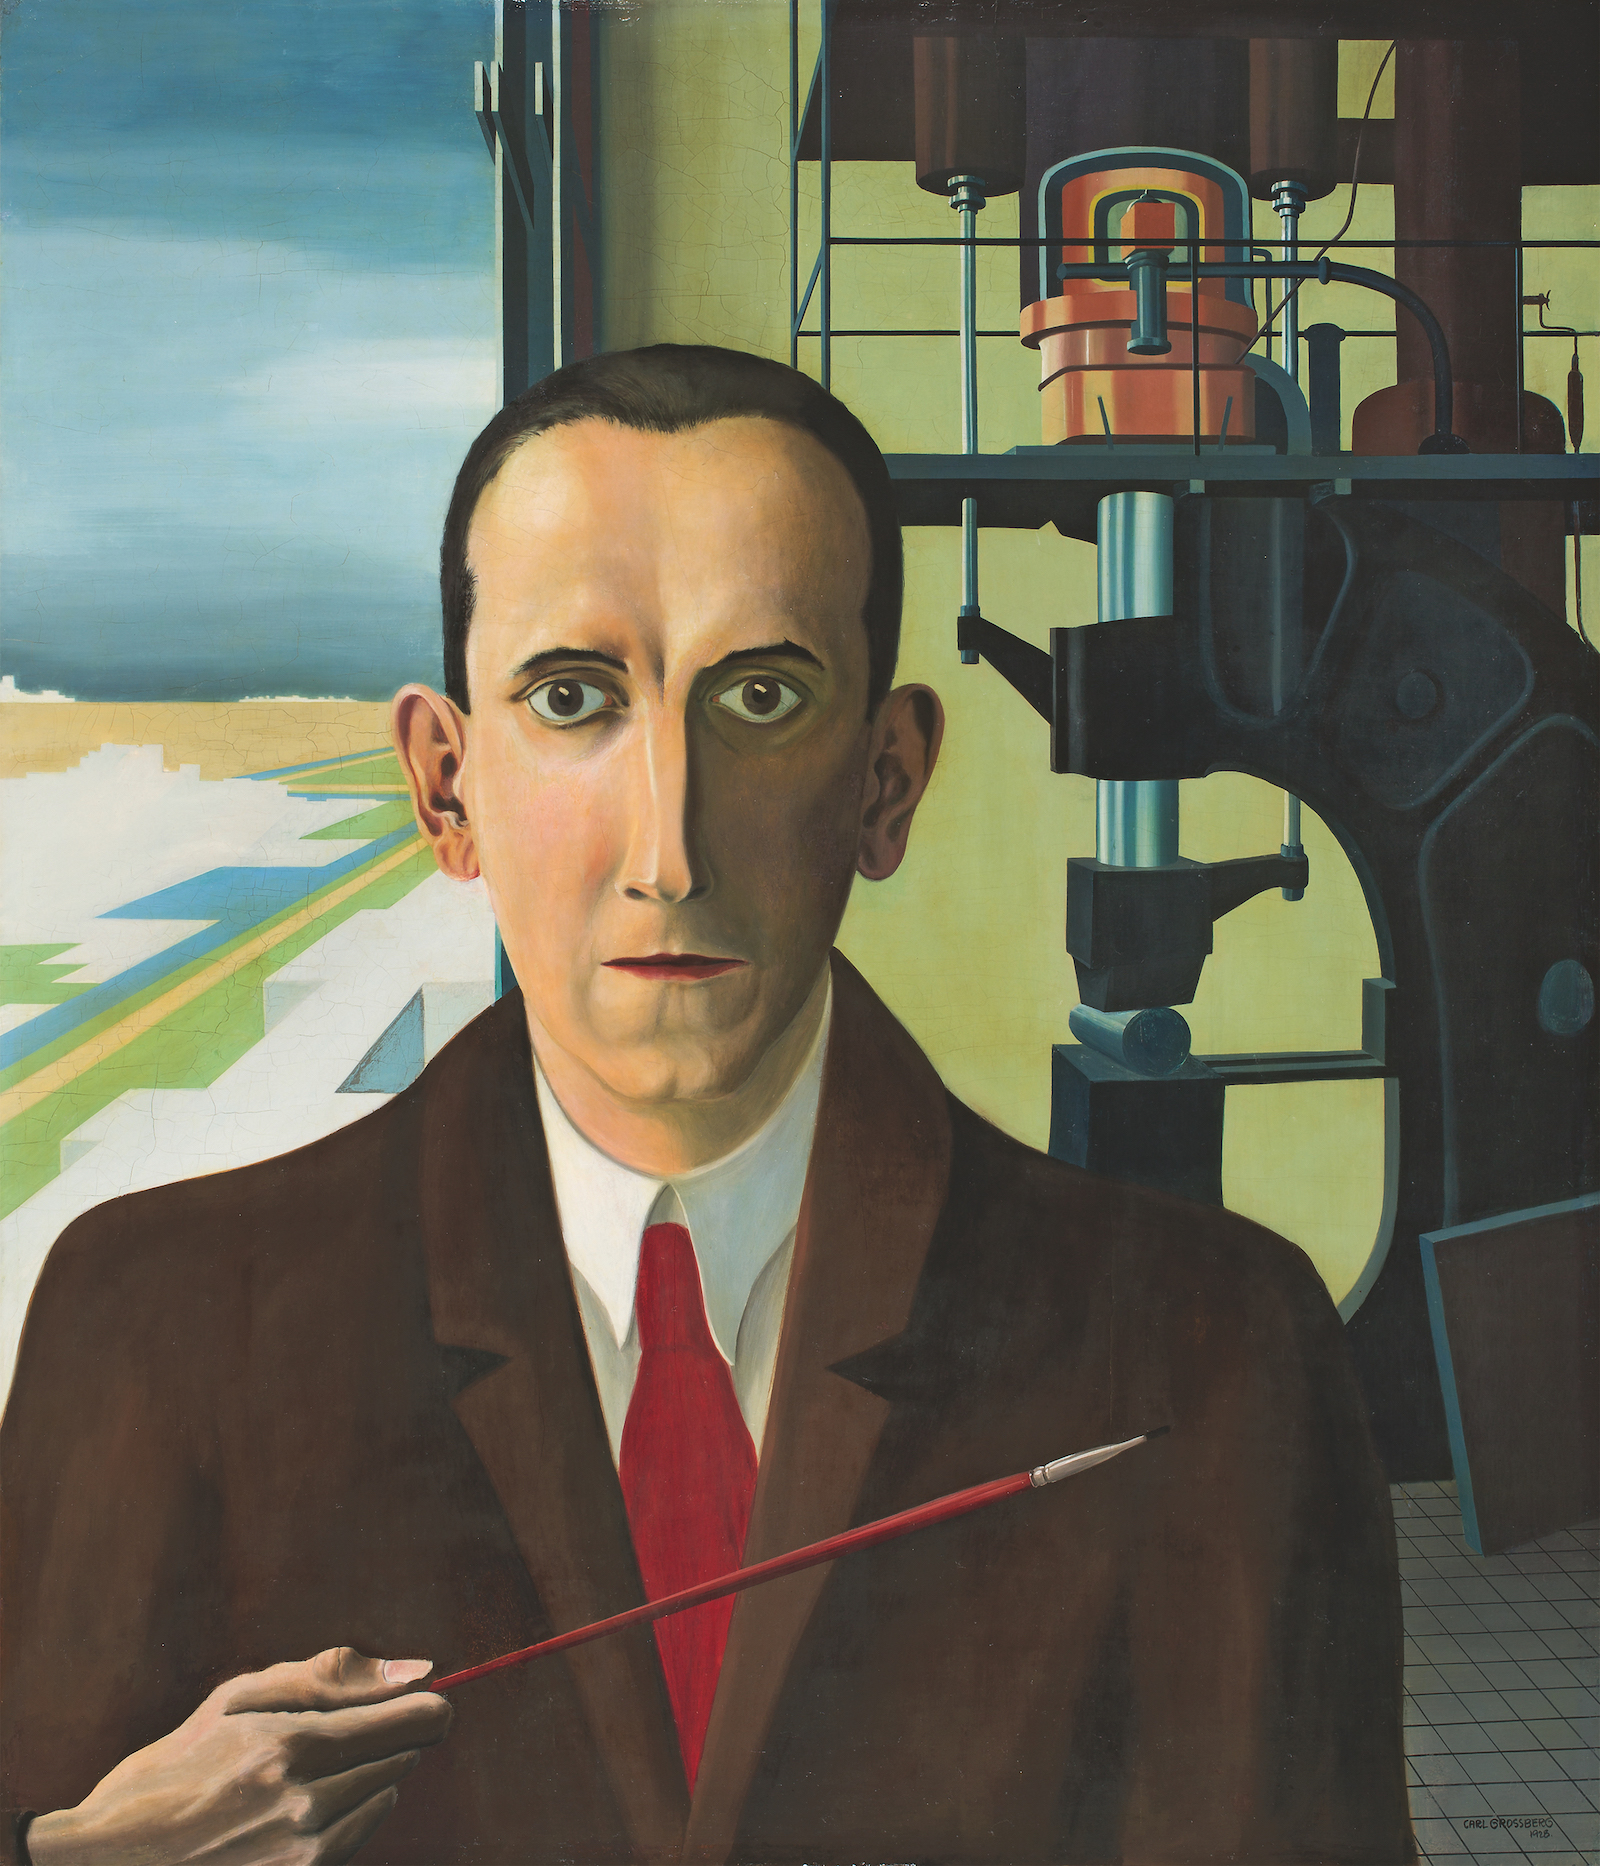 A self-portrait of a painter in which the painter stands, in a suit, in front of a machine